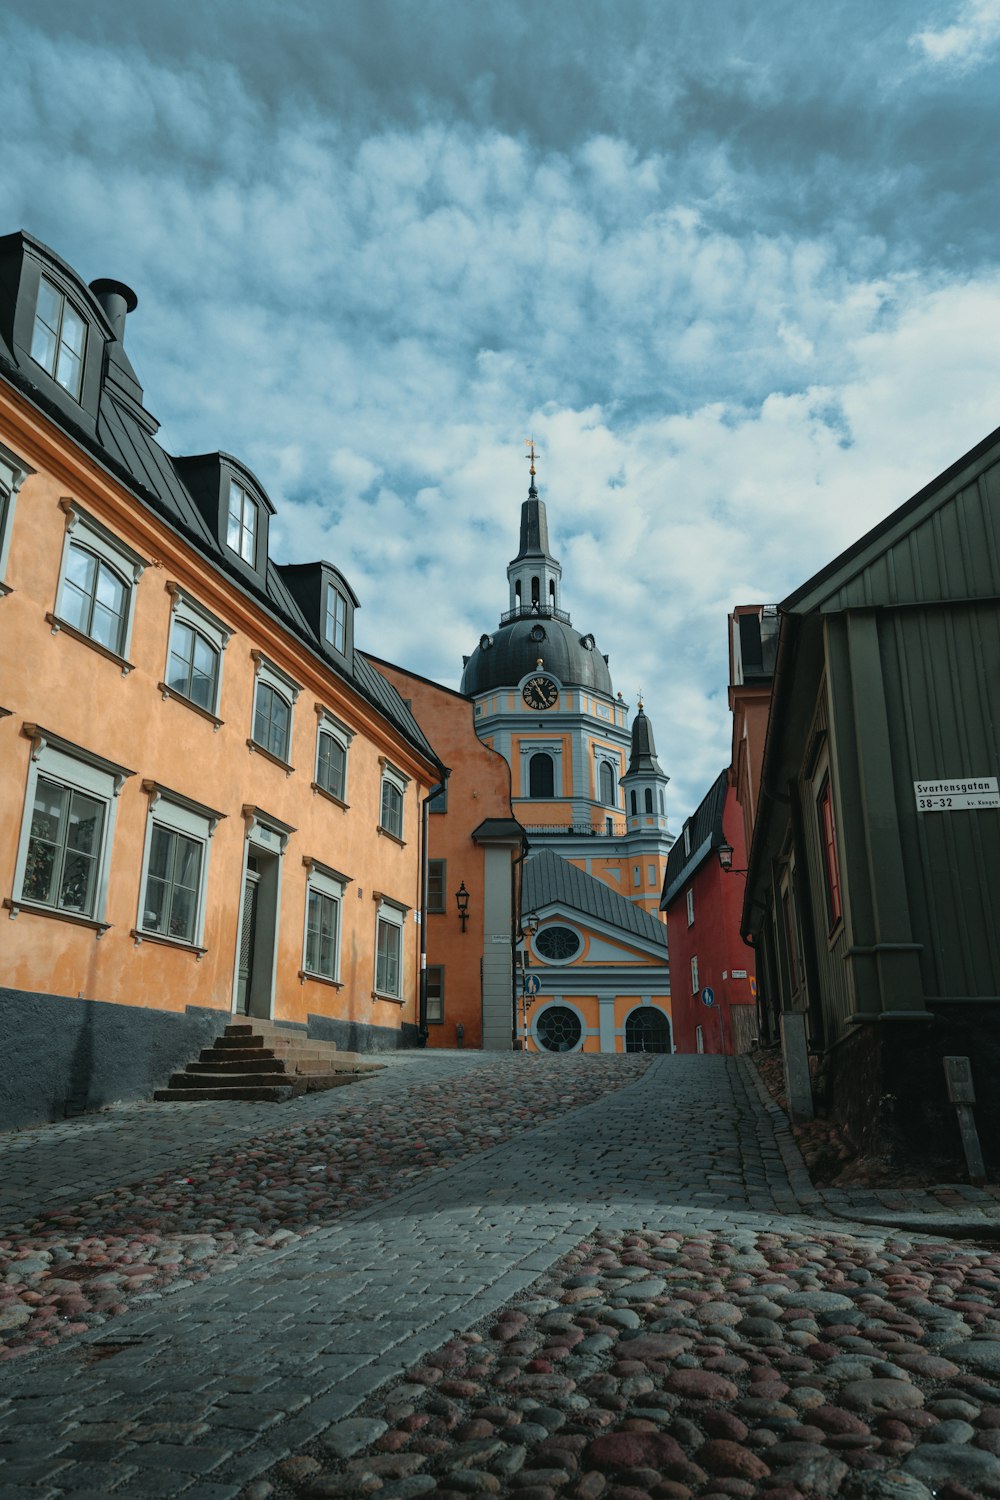 a cobblestone street with a church steeple in the background